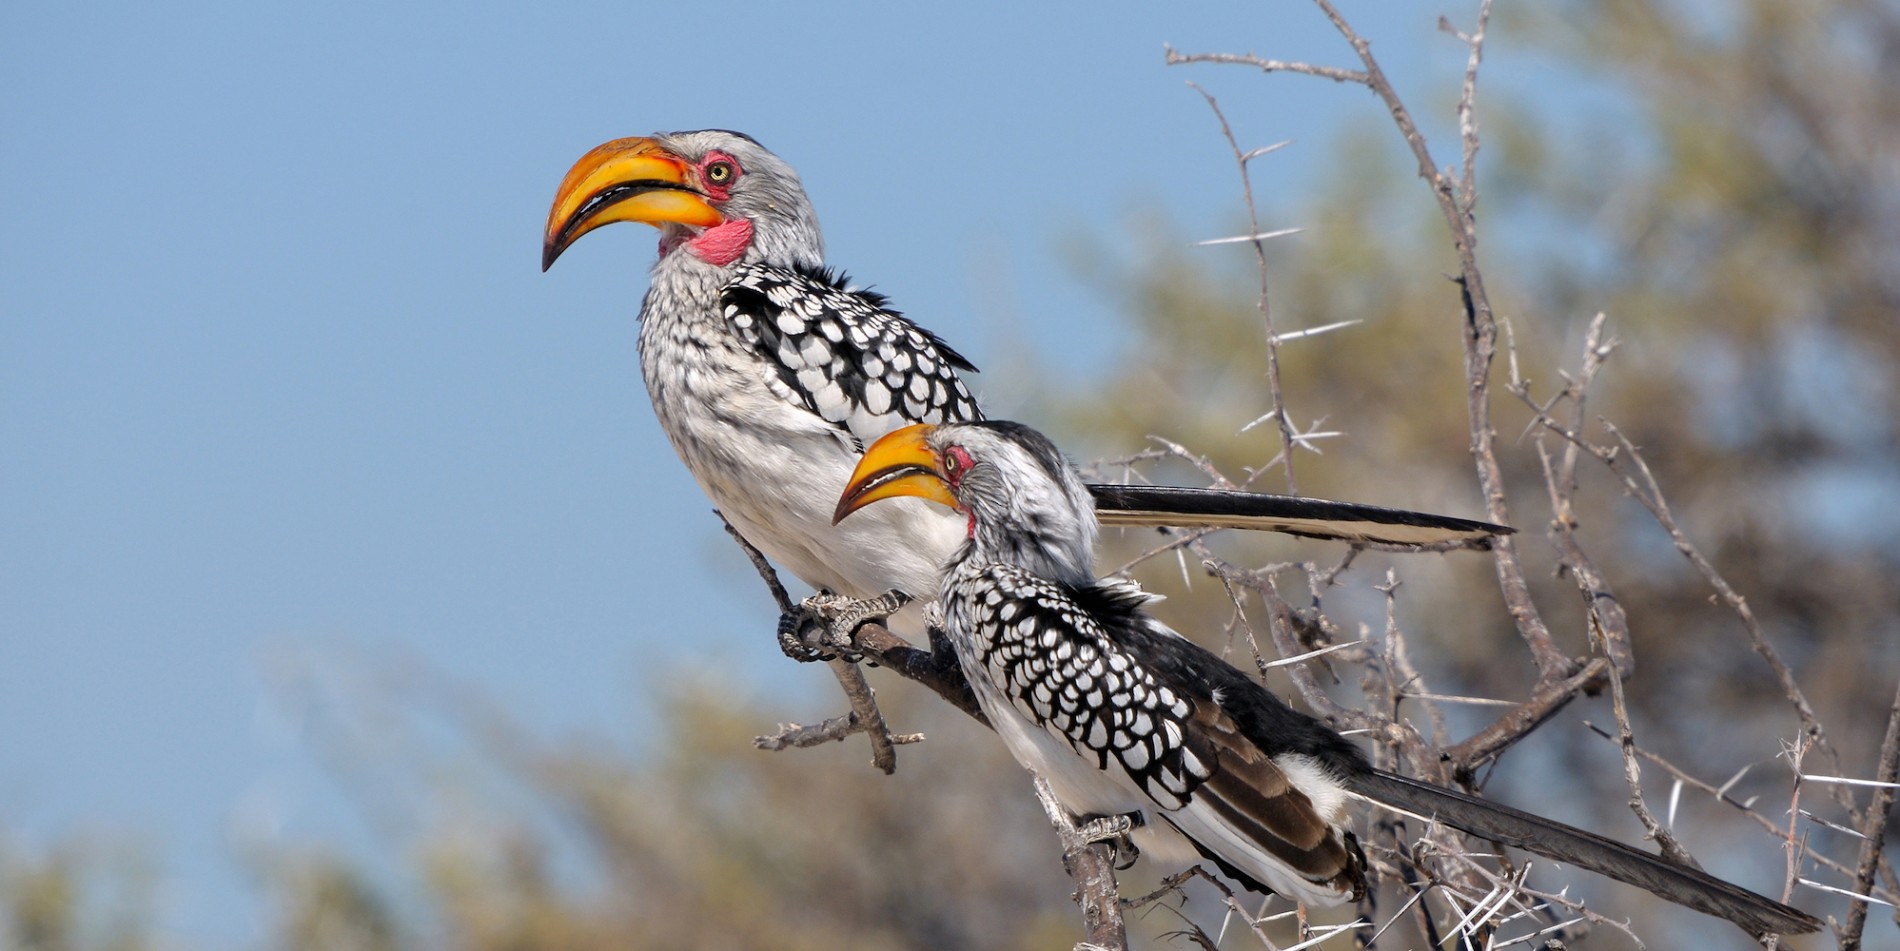 Two southern yellow billed hornbills perched in a tree on a sunny day